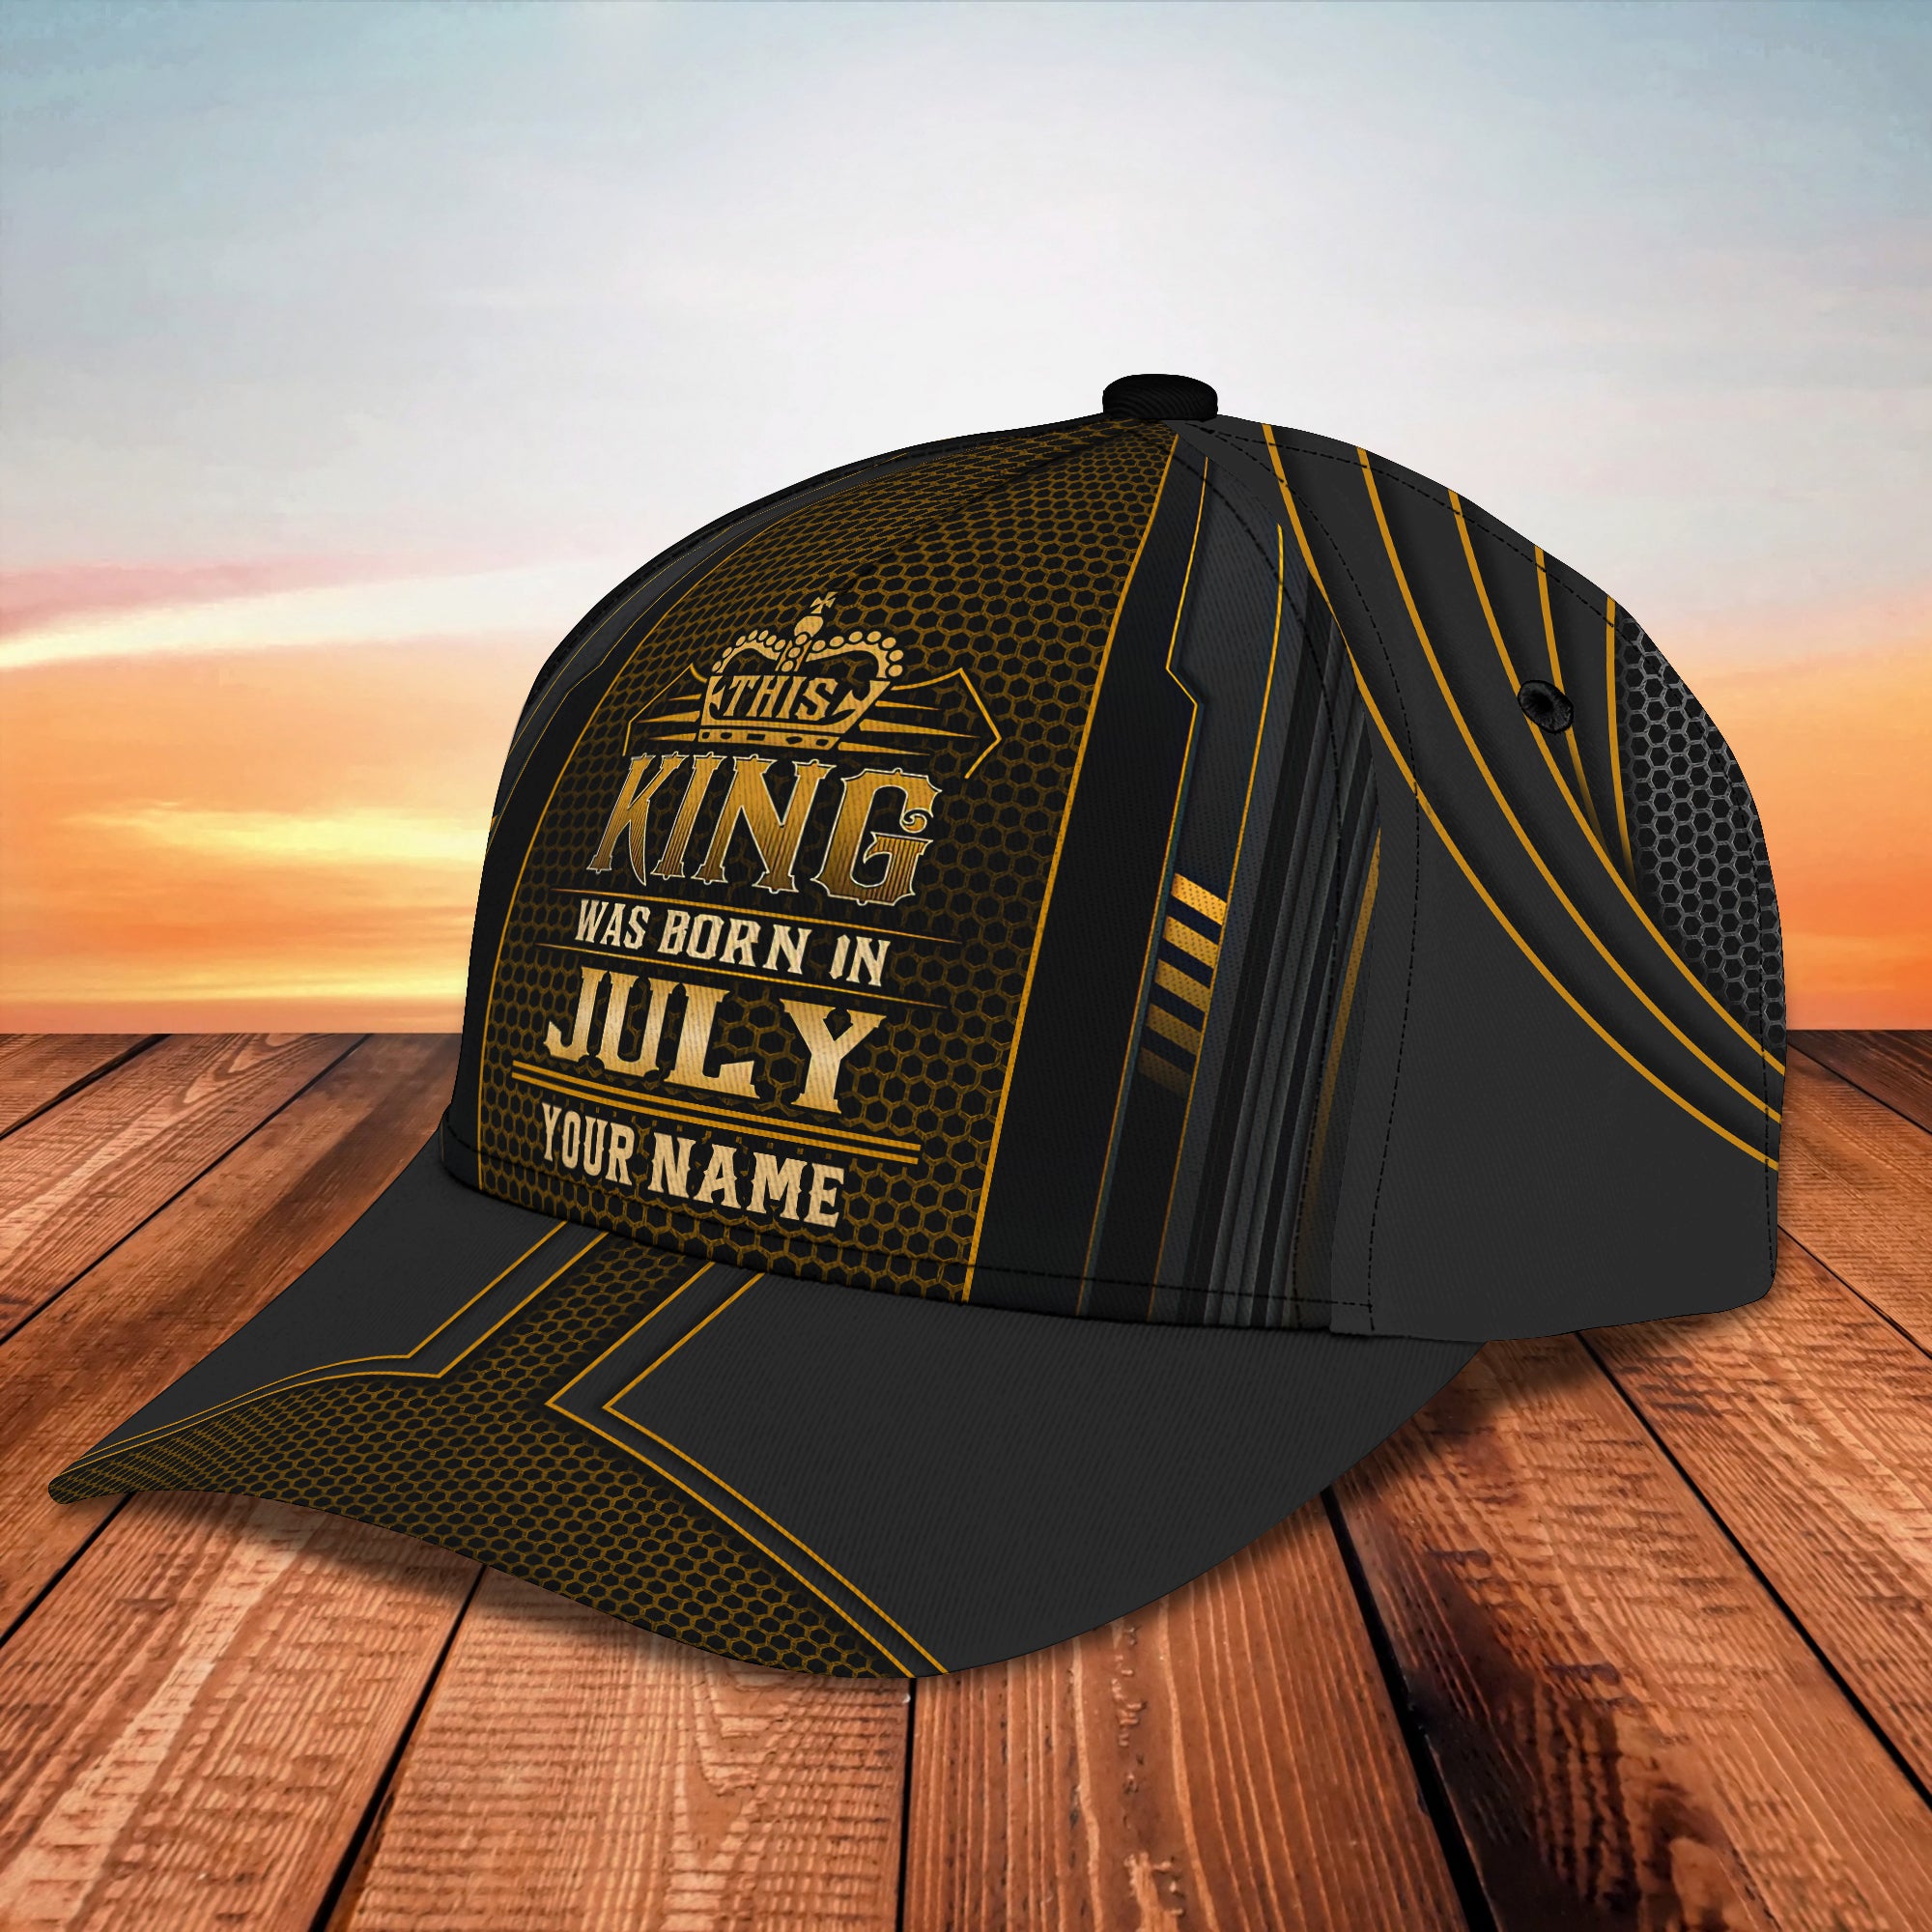 July King - Personalized Name Cap 22 - Nvc97